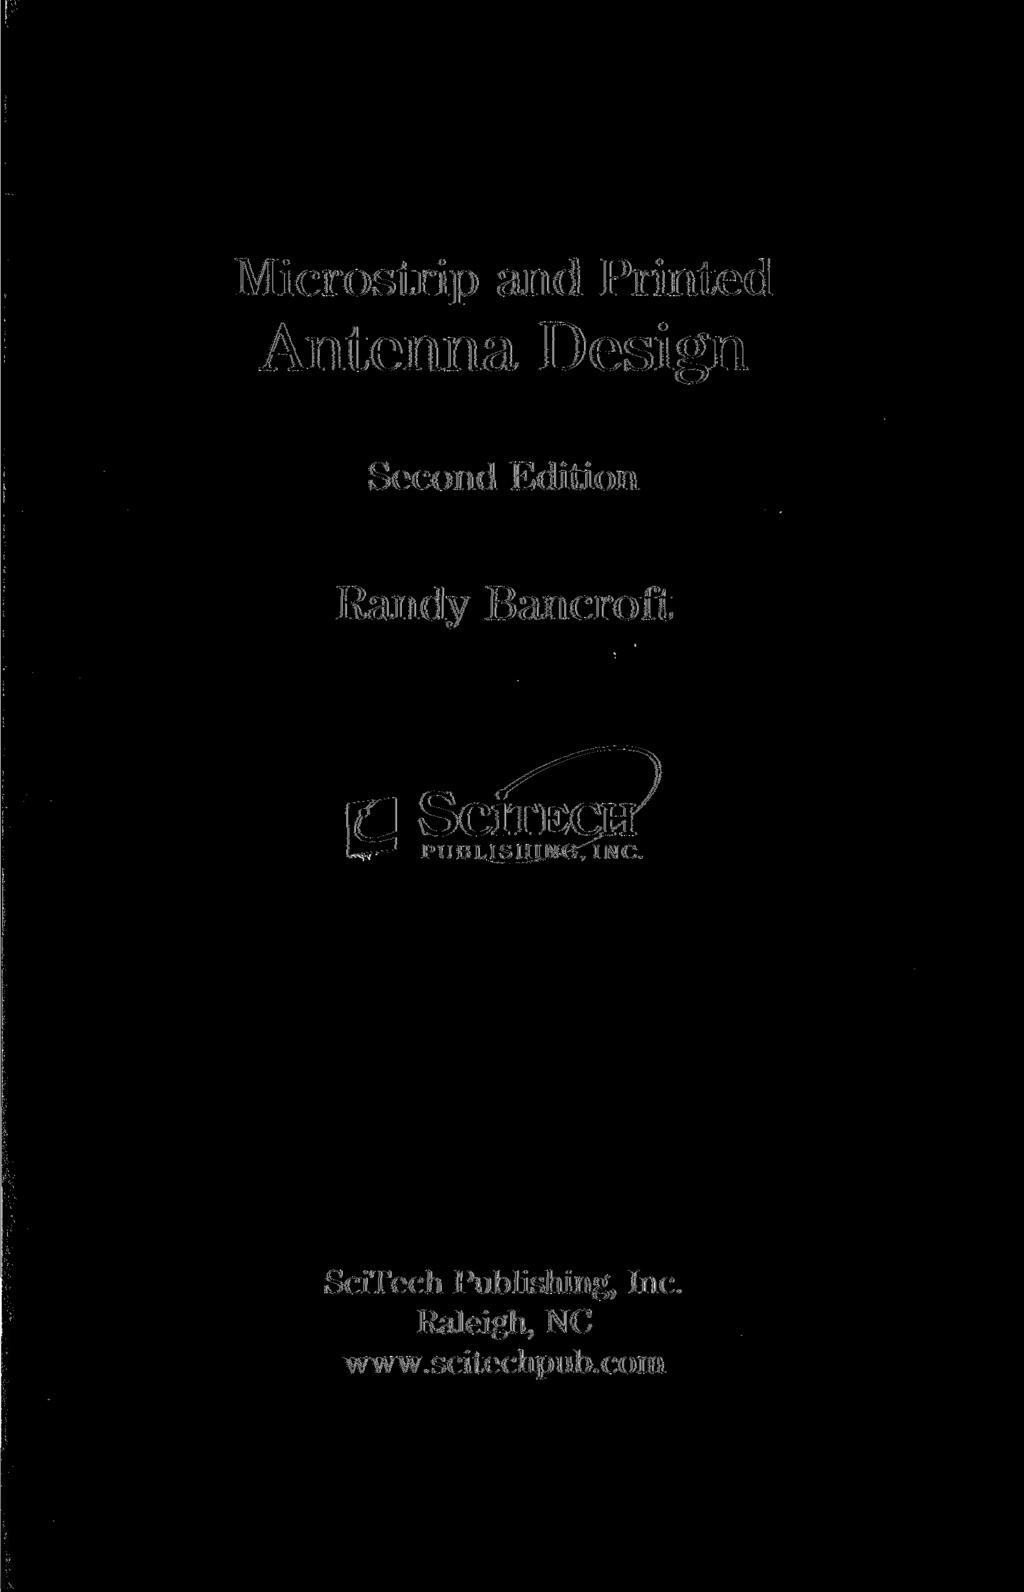 Microstrip and Printed Antenna Design Second Edition Randy Bancroft S SCITEC